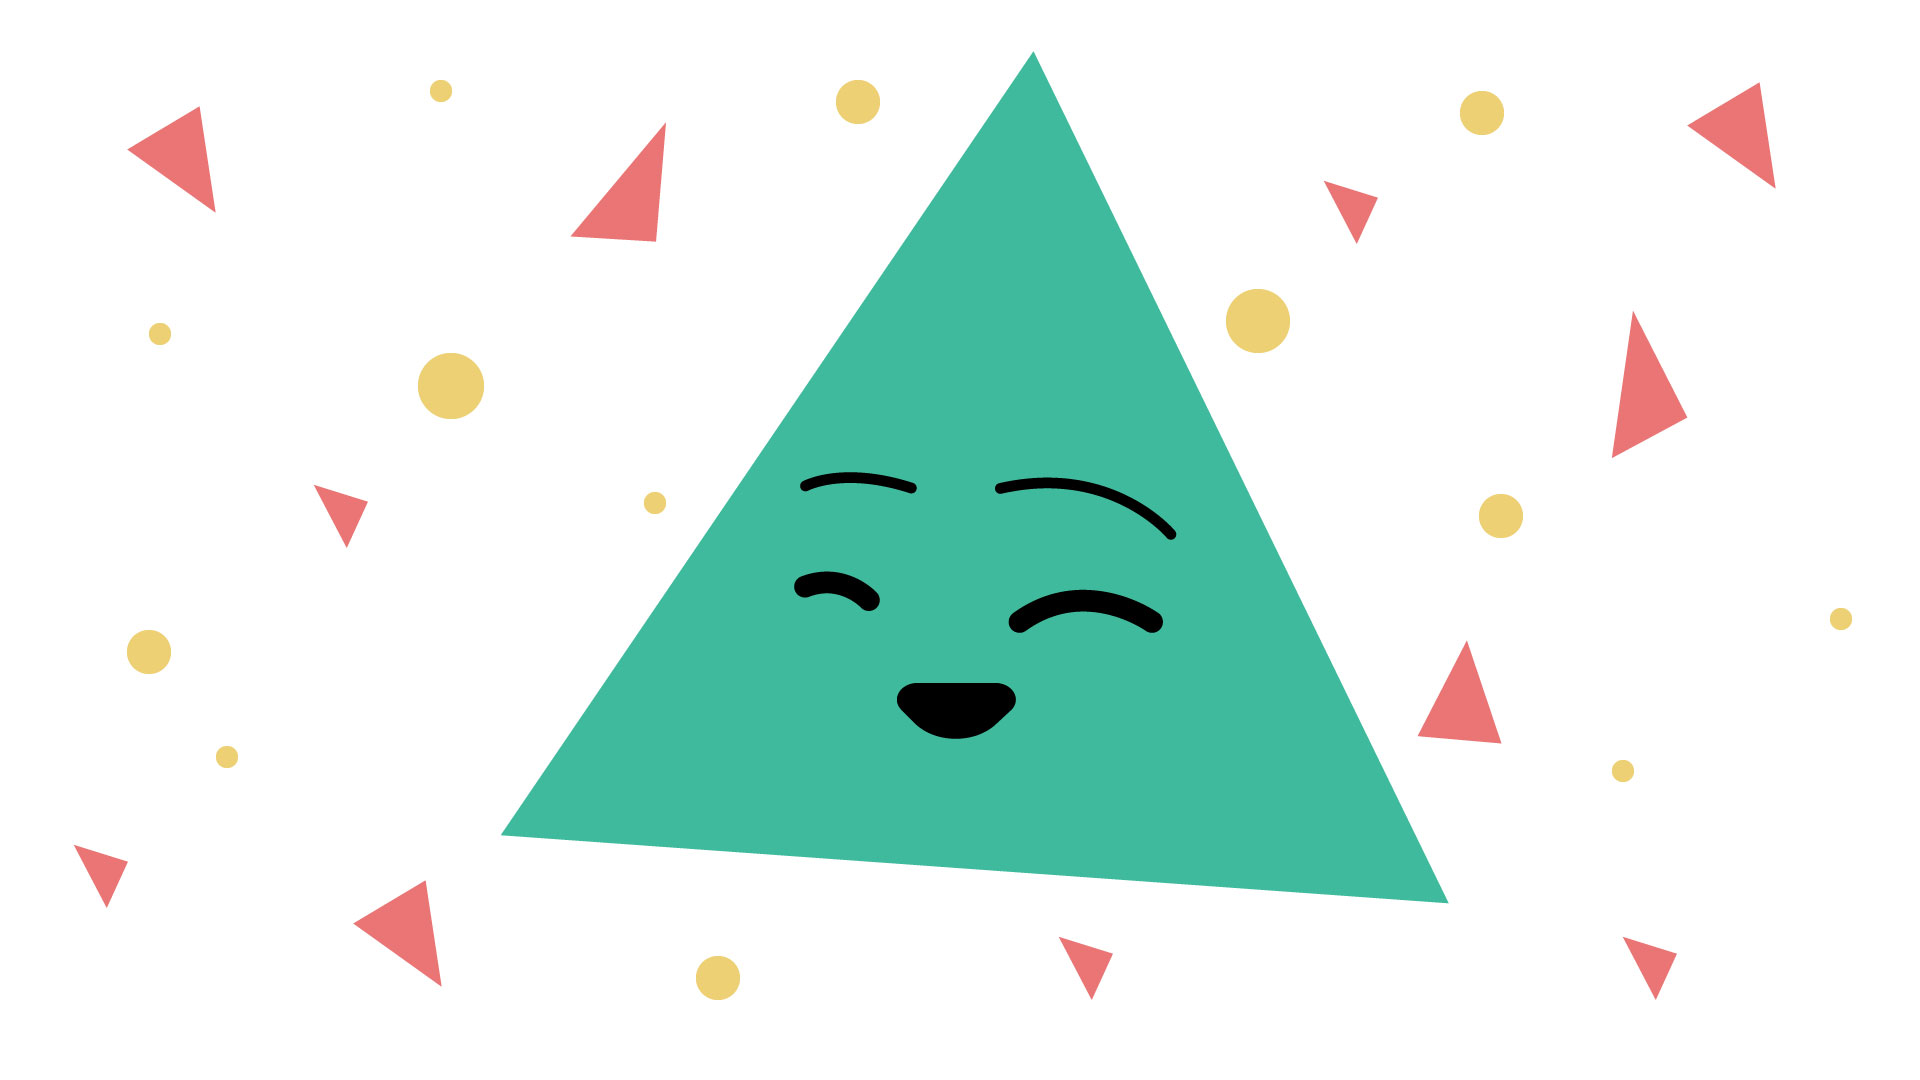 image of the triangle character celebrating